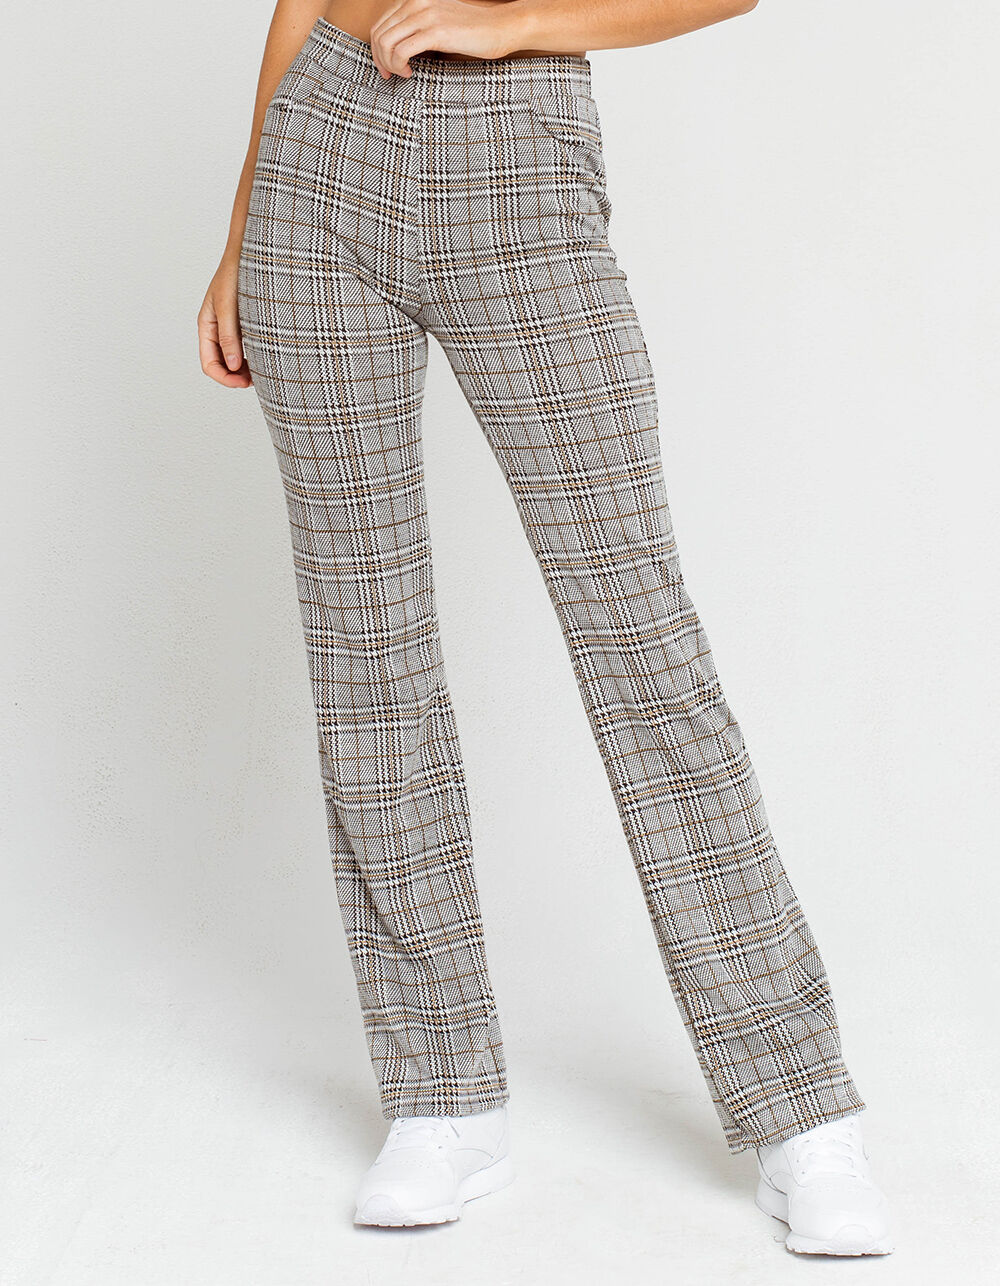 RSQ Plaid Womens Gray Flare Pants - GRAY COMBO | Tillys